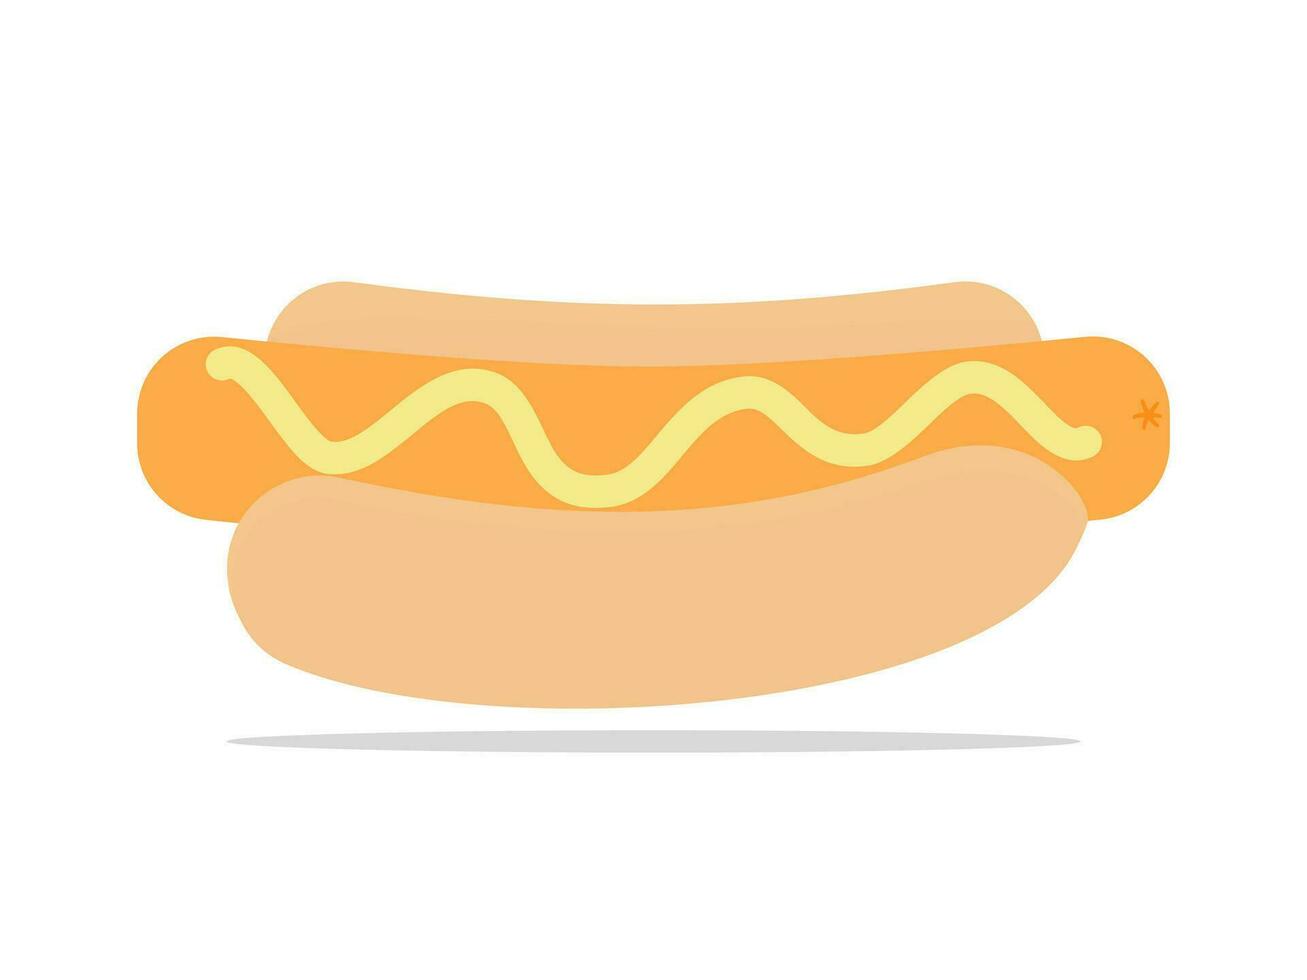 Grilled hot dogs in cartoon style. Vector icon.